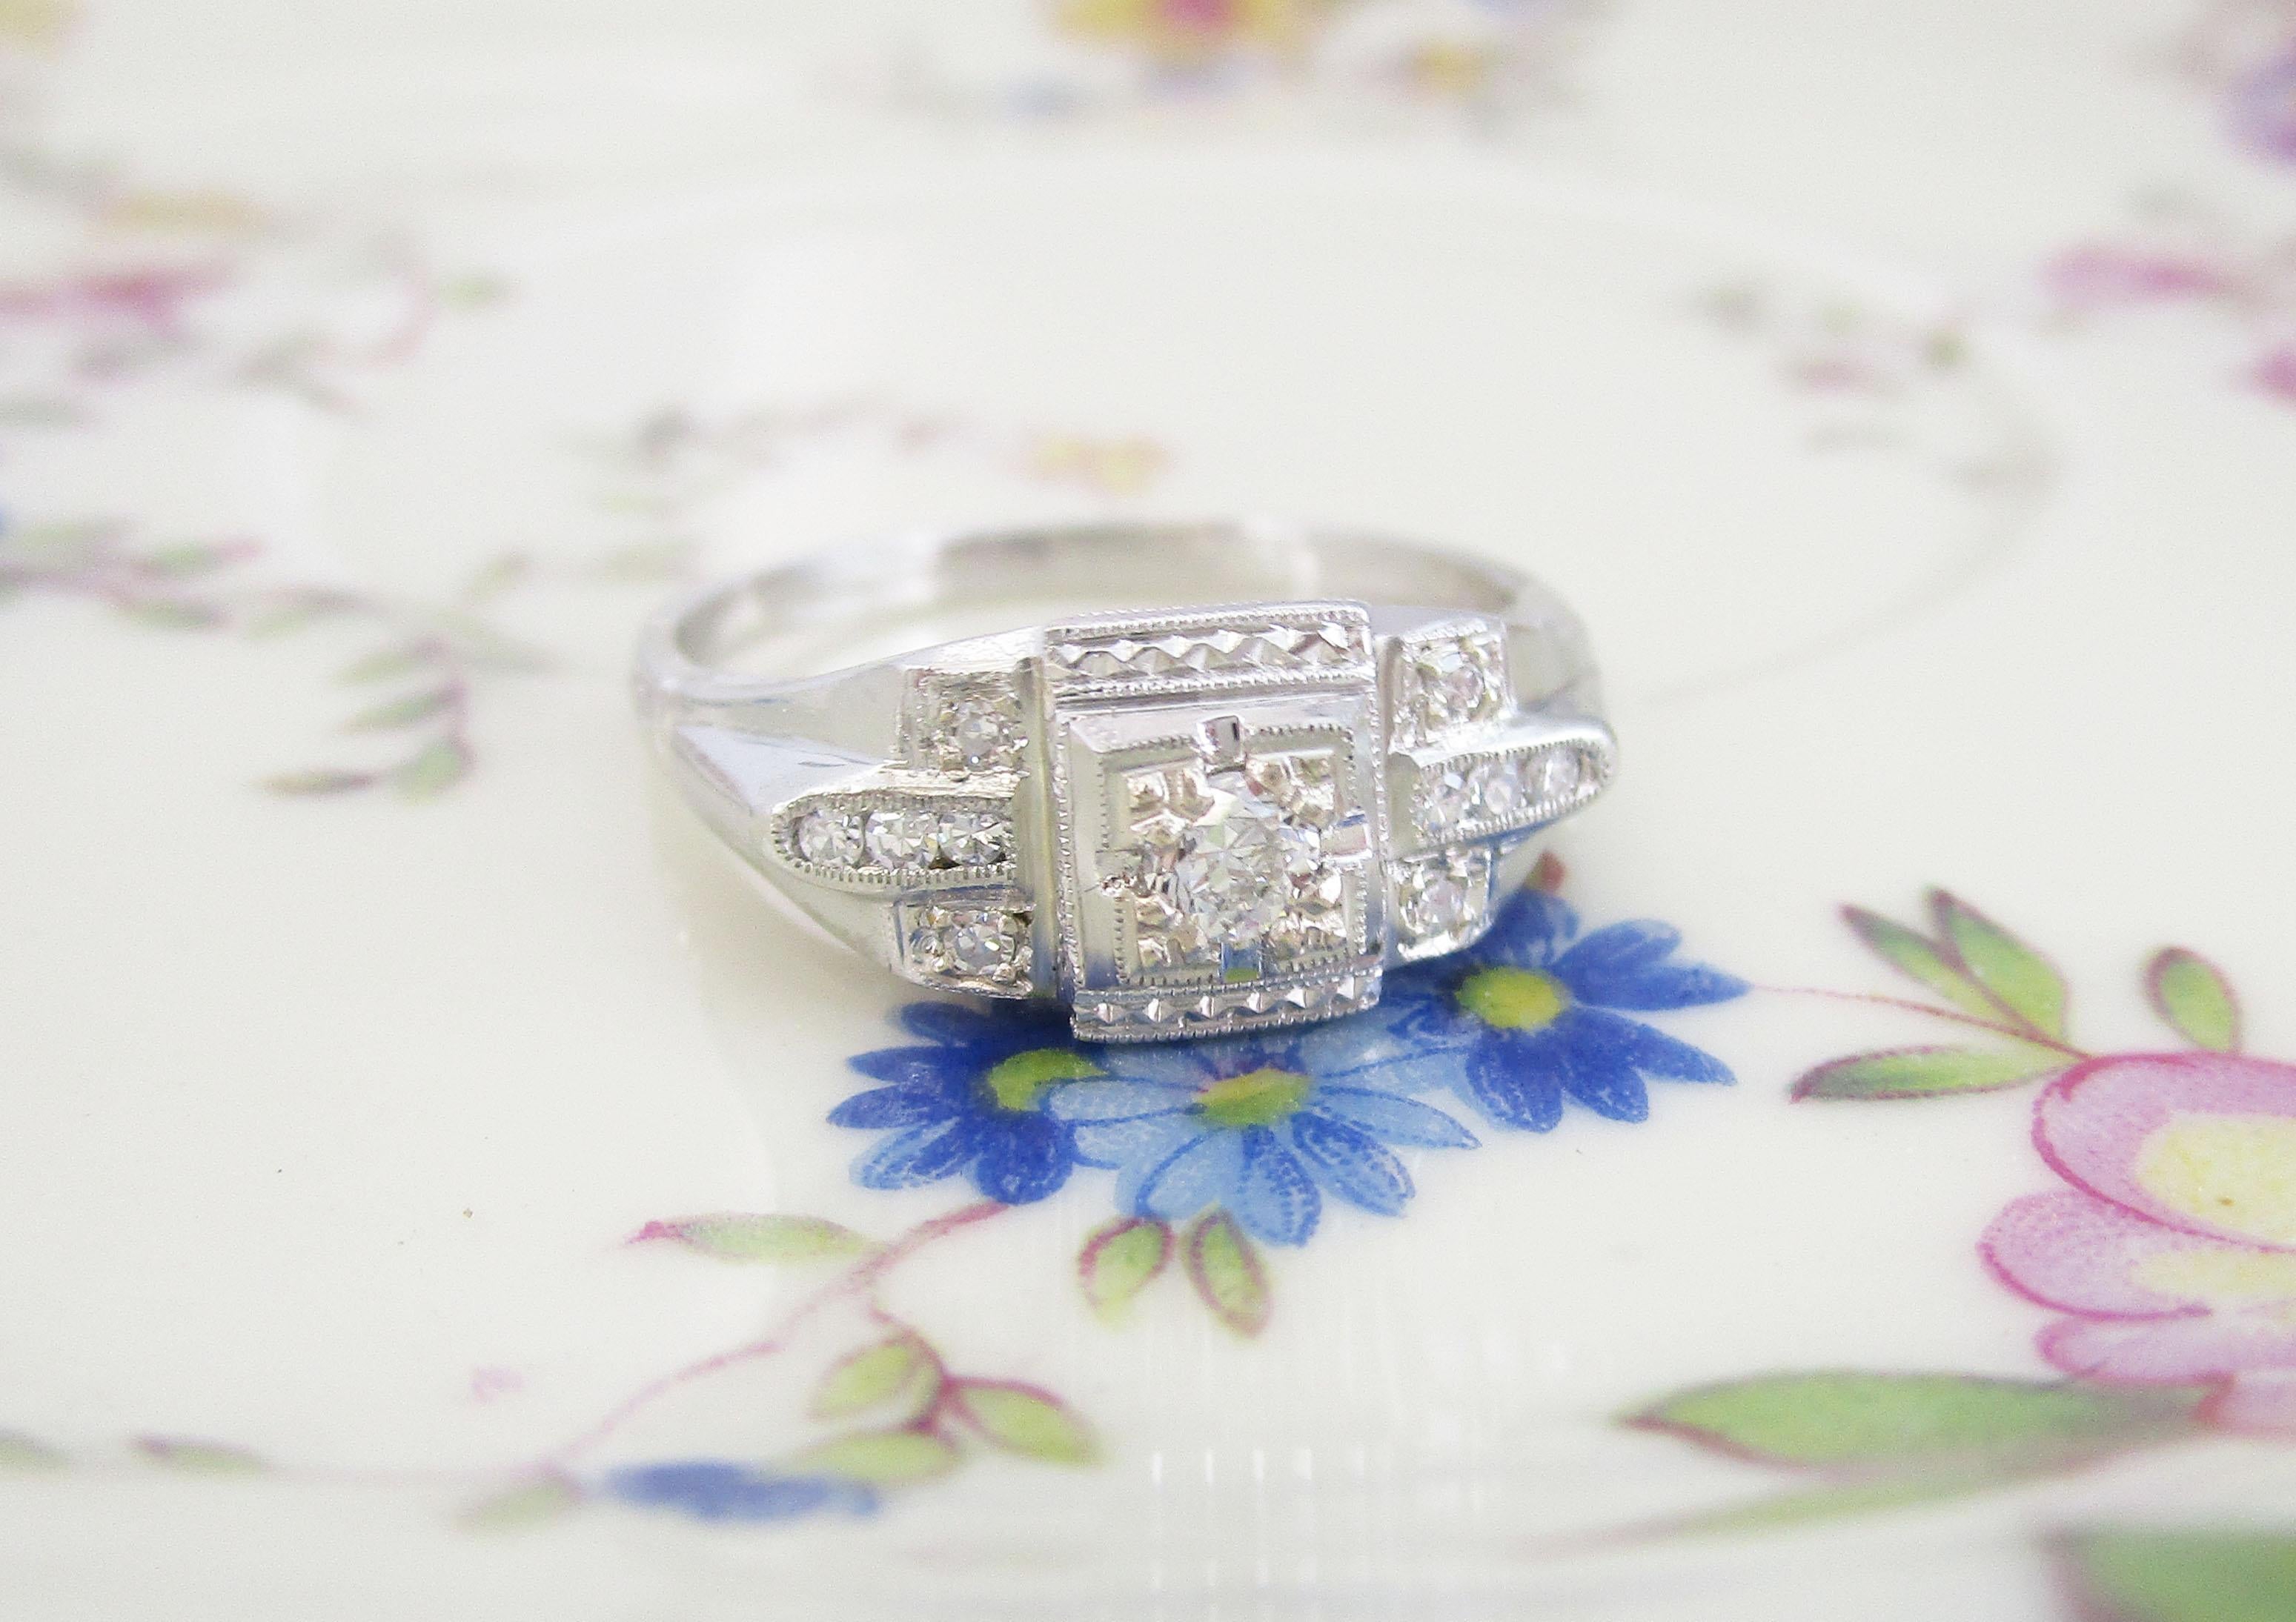 This beautiful Art Deco engagement ring is in 18k white gold and has a beautiful old euro cut diamond center. The diamond center is accented by ten smaller sparkling diamonds surrounded with milgrain details. The Art Deco influence is clear in the